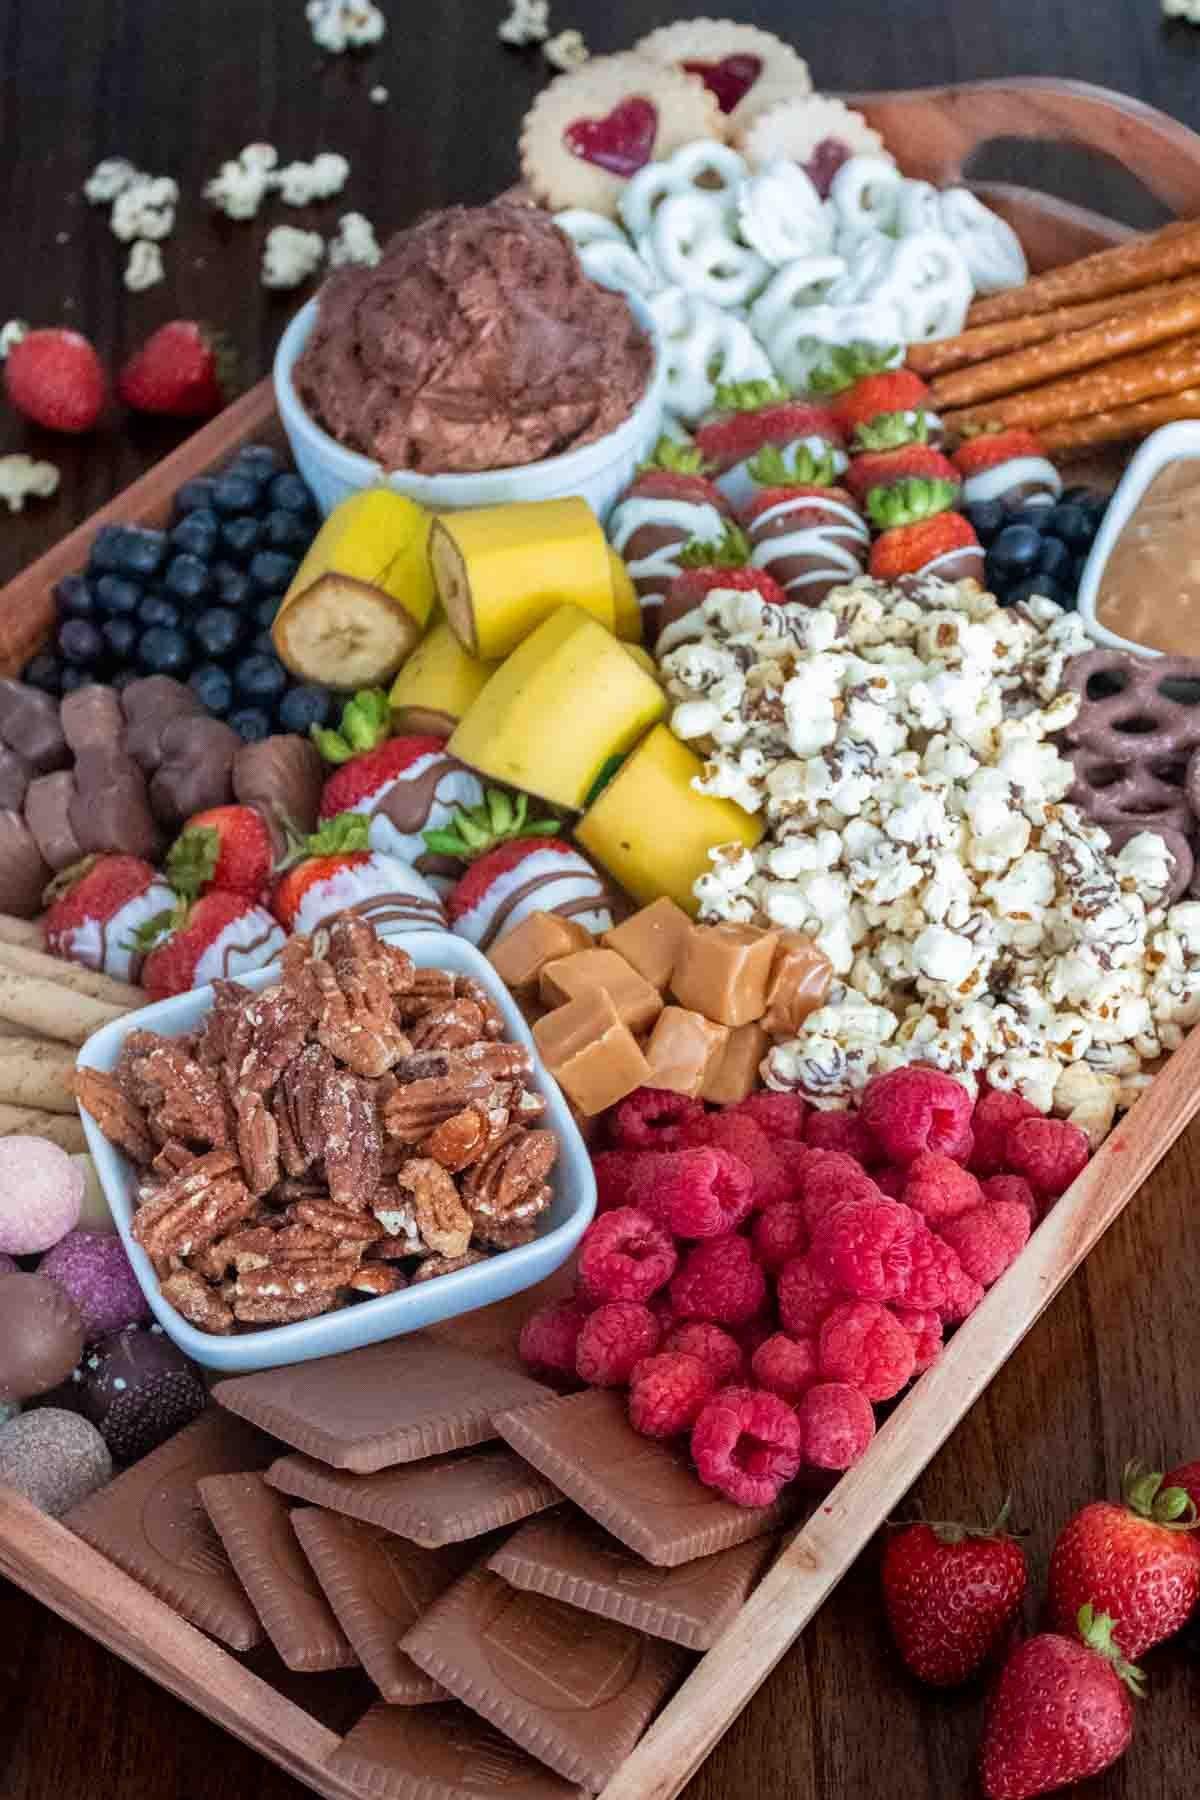 Dessert charcuterie board with chocolate covered pretzels, strawberries, popcorn, bananas, chocolates, and blueberries.